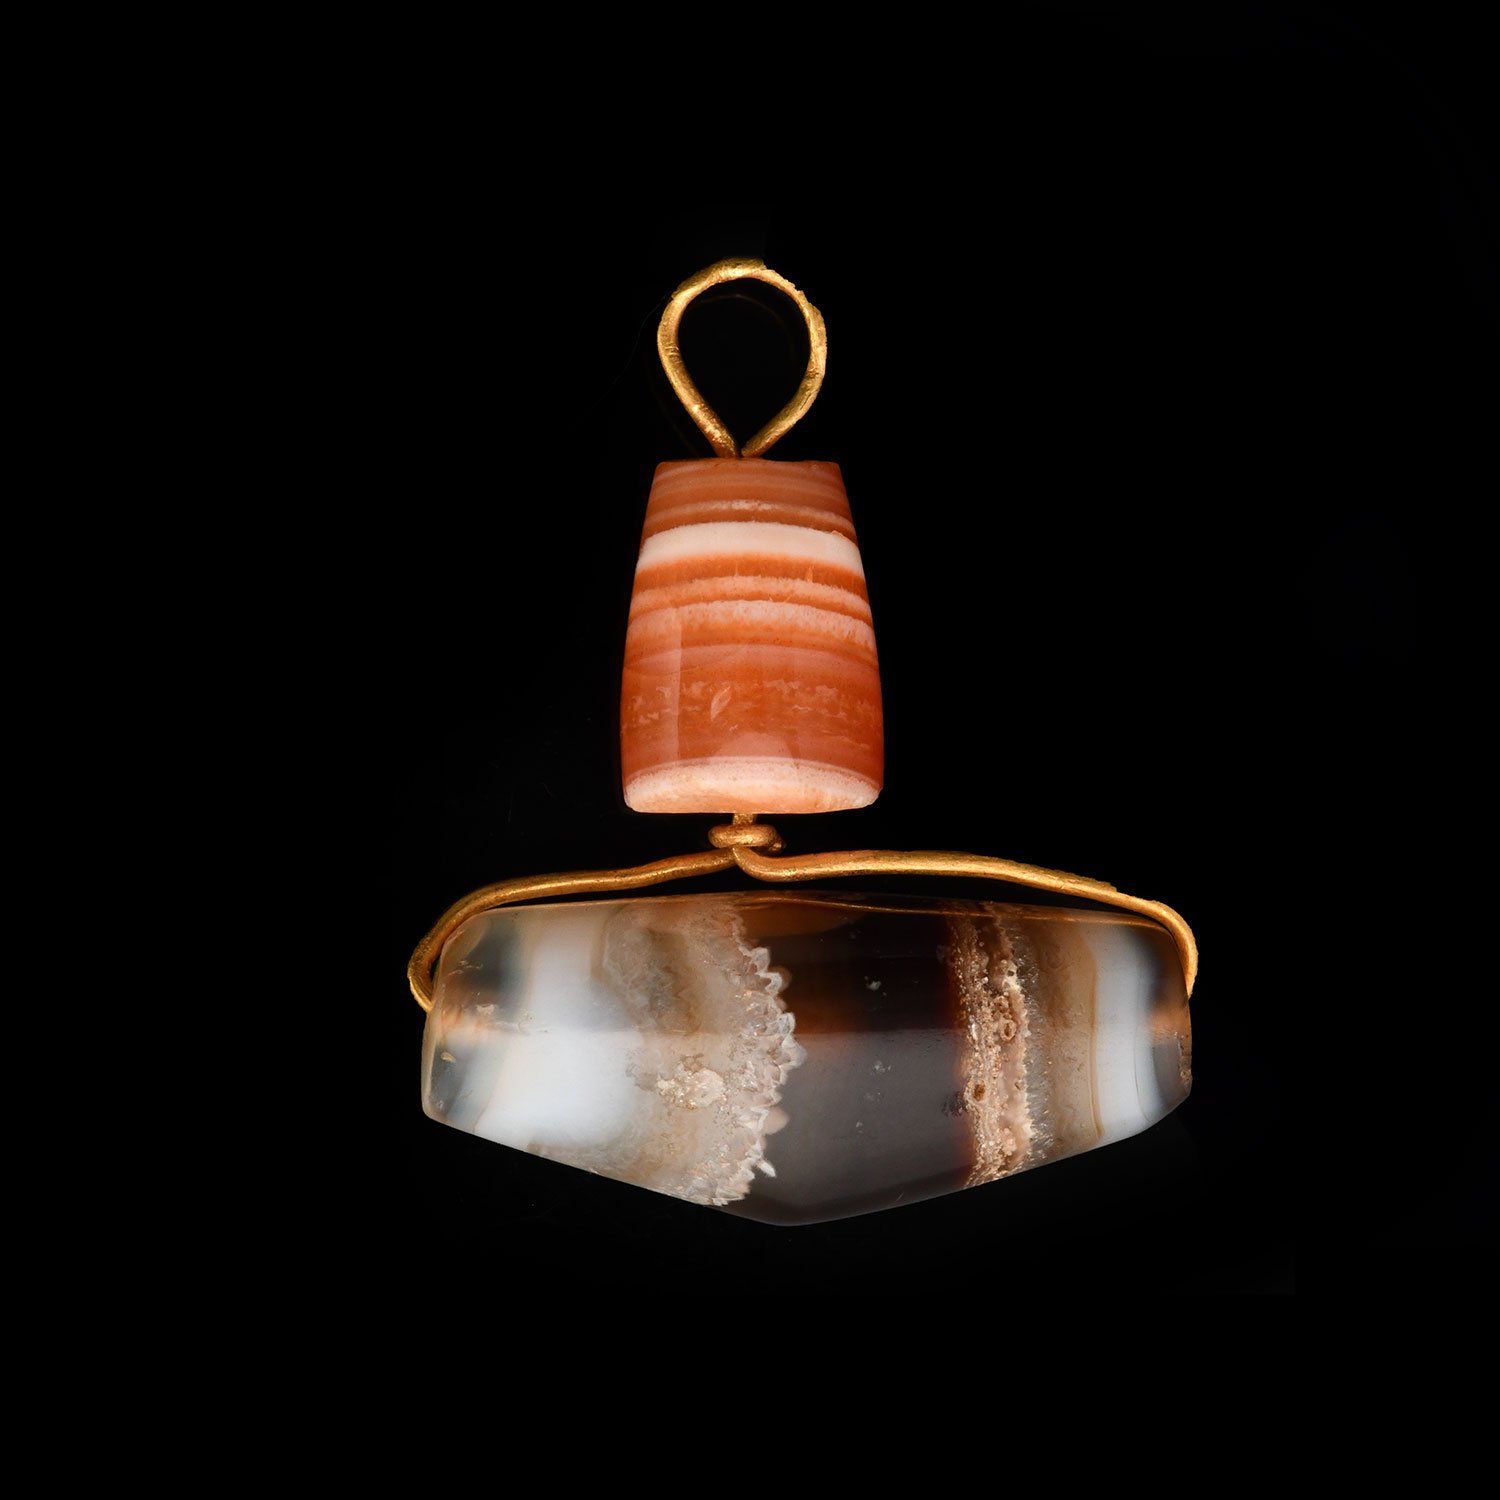 A fine Persian Agate and Gold Pendant, ca. 550 - 330 BCE